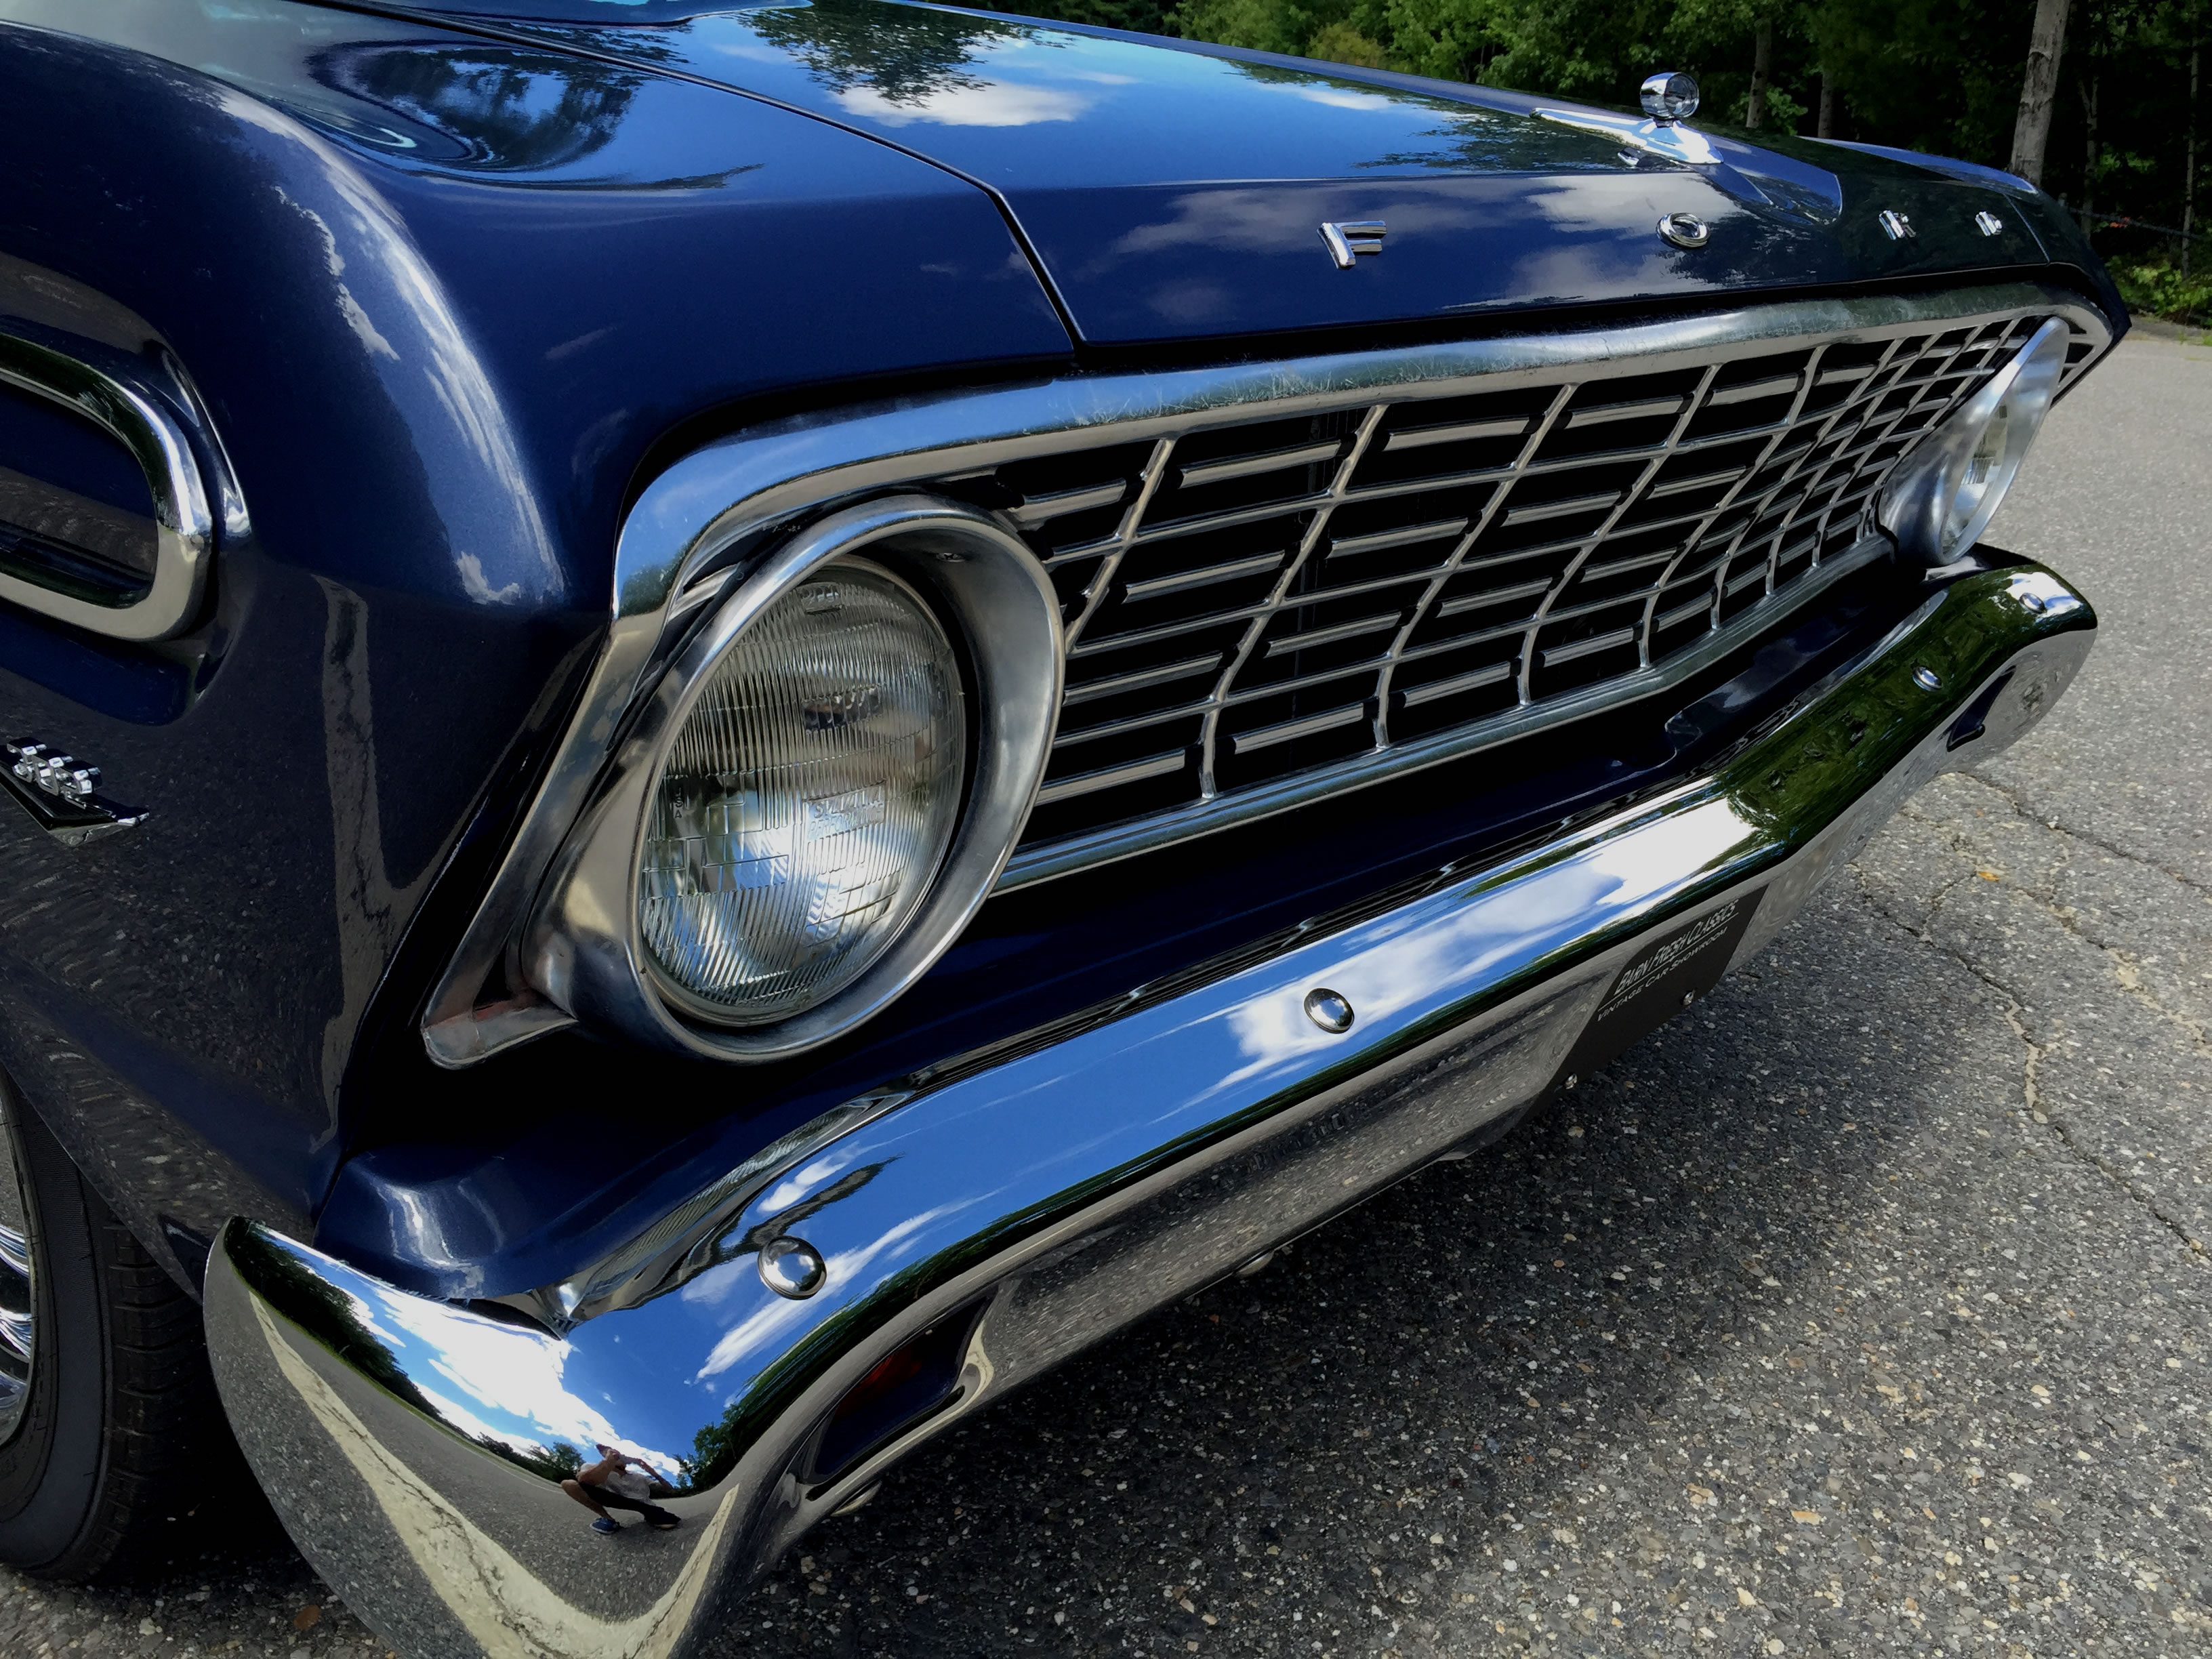 Classic Car Dealer Maine | We Buy and Sell Muscle Cars